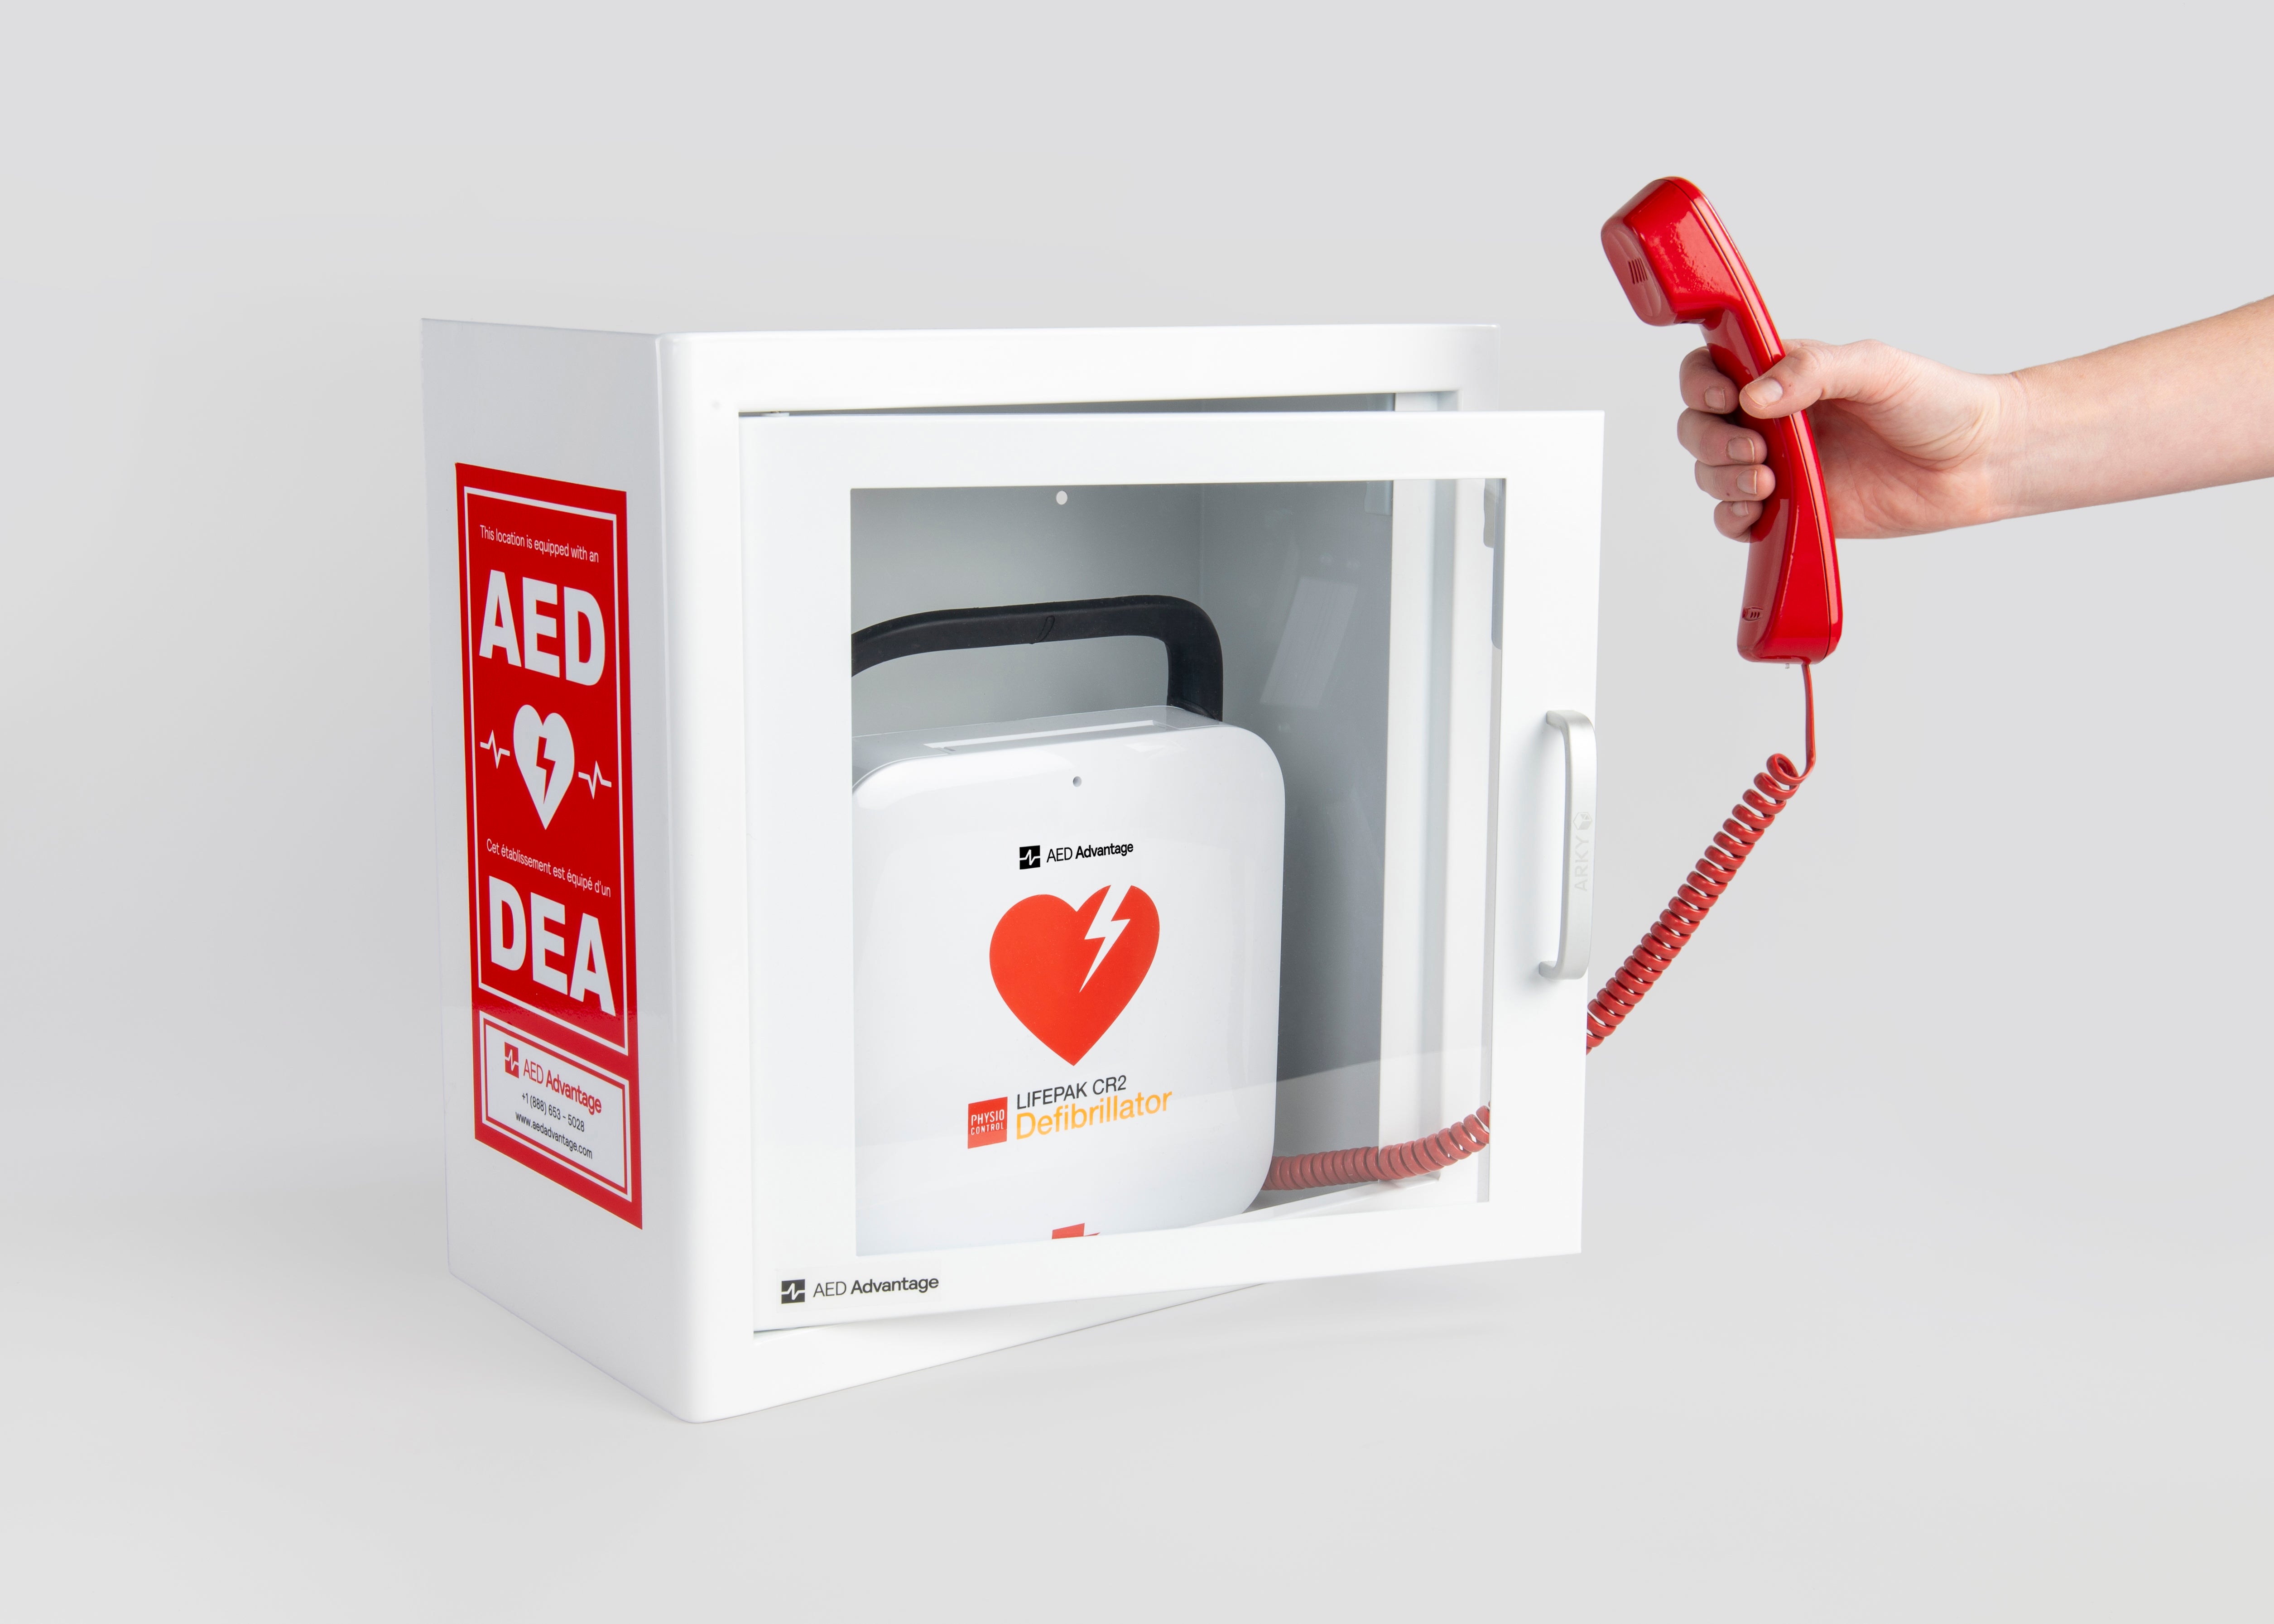 A phone being pulled out of a white and red AED cabinet made to look like a phone booth